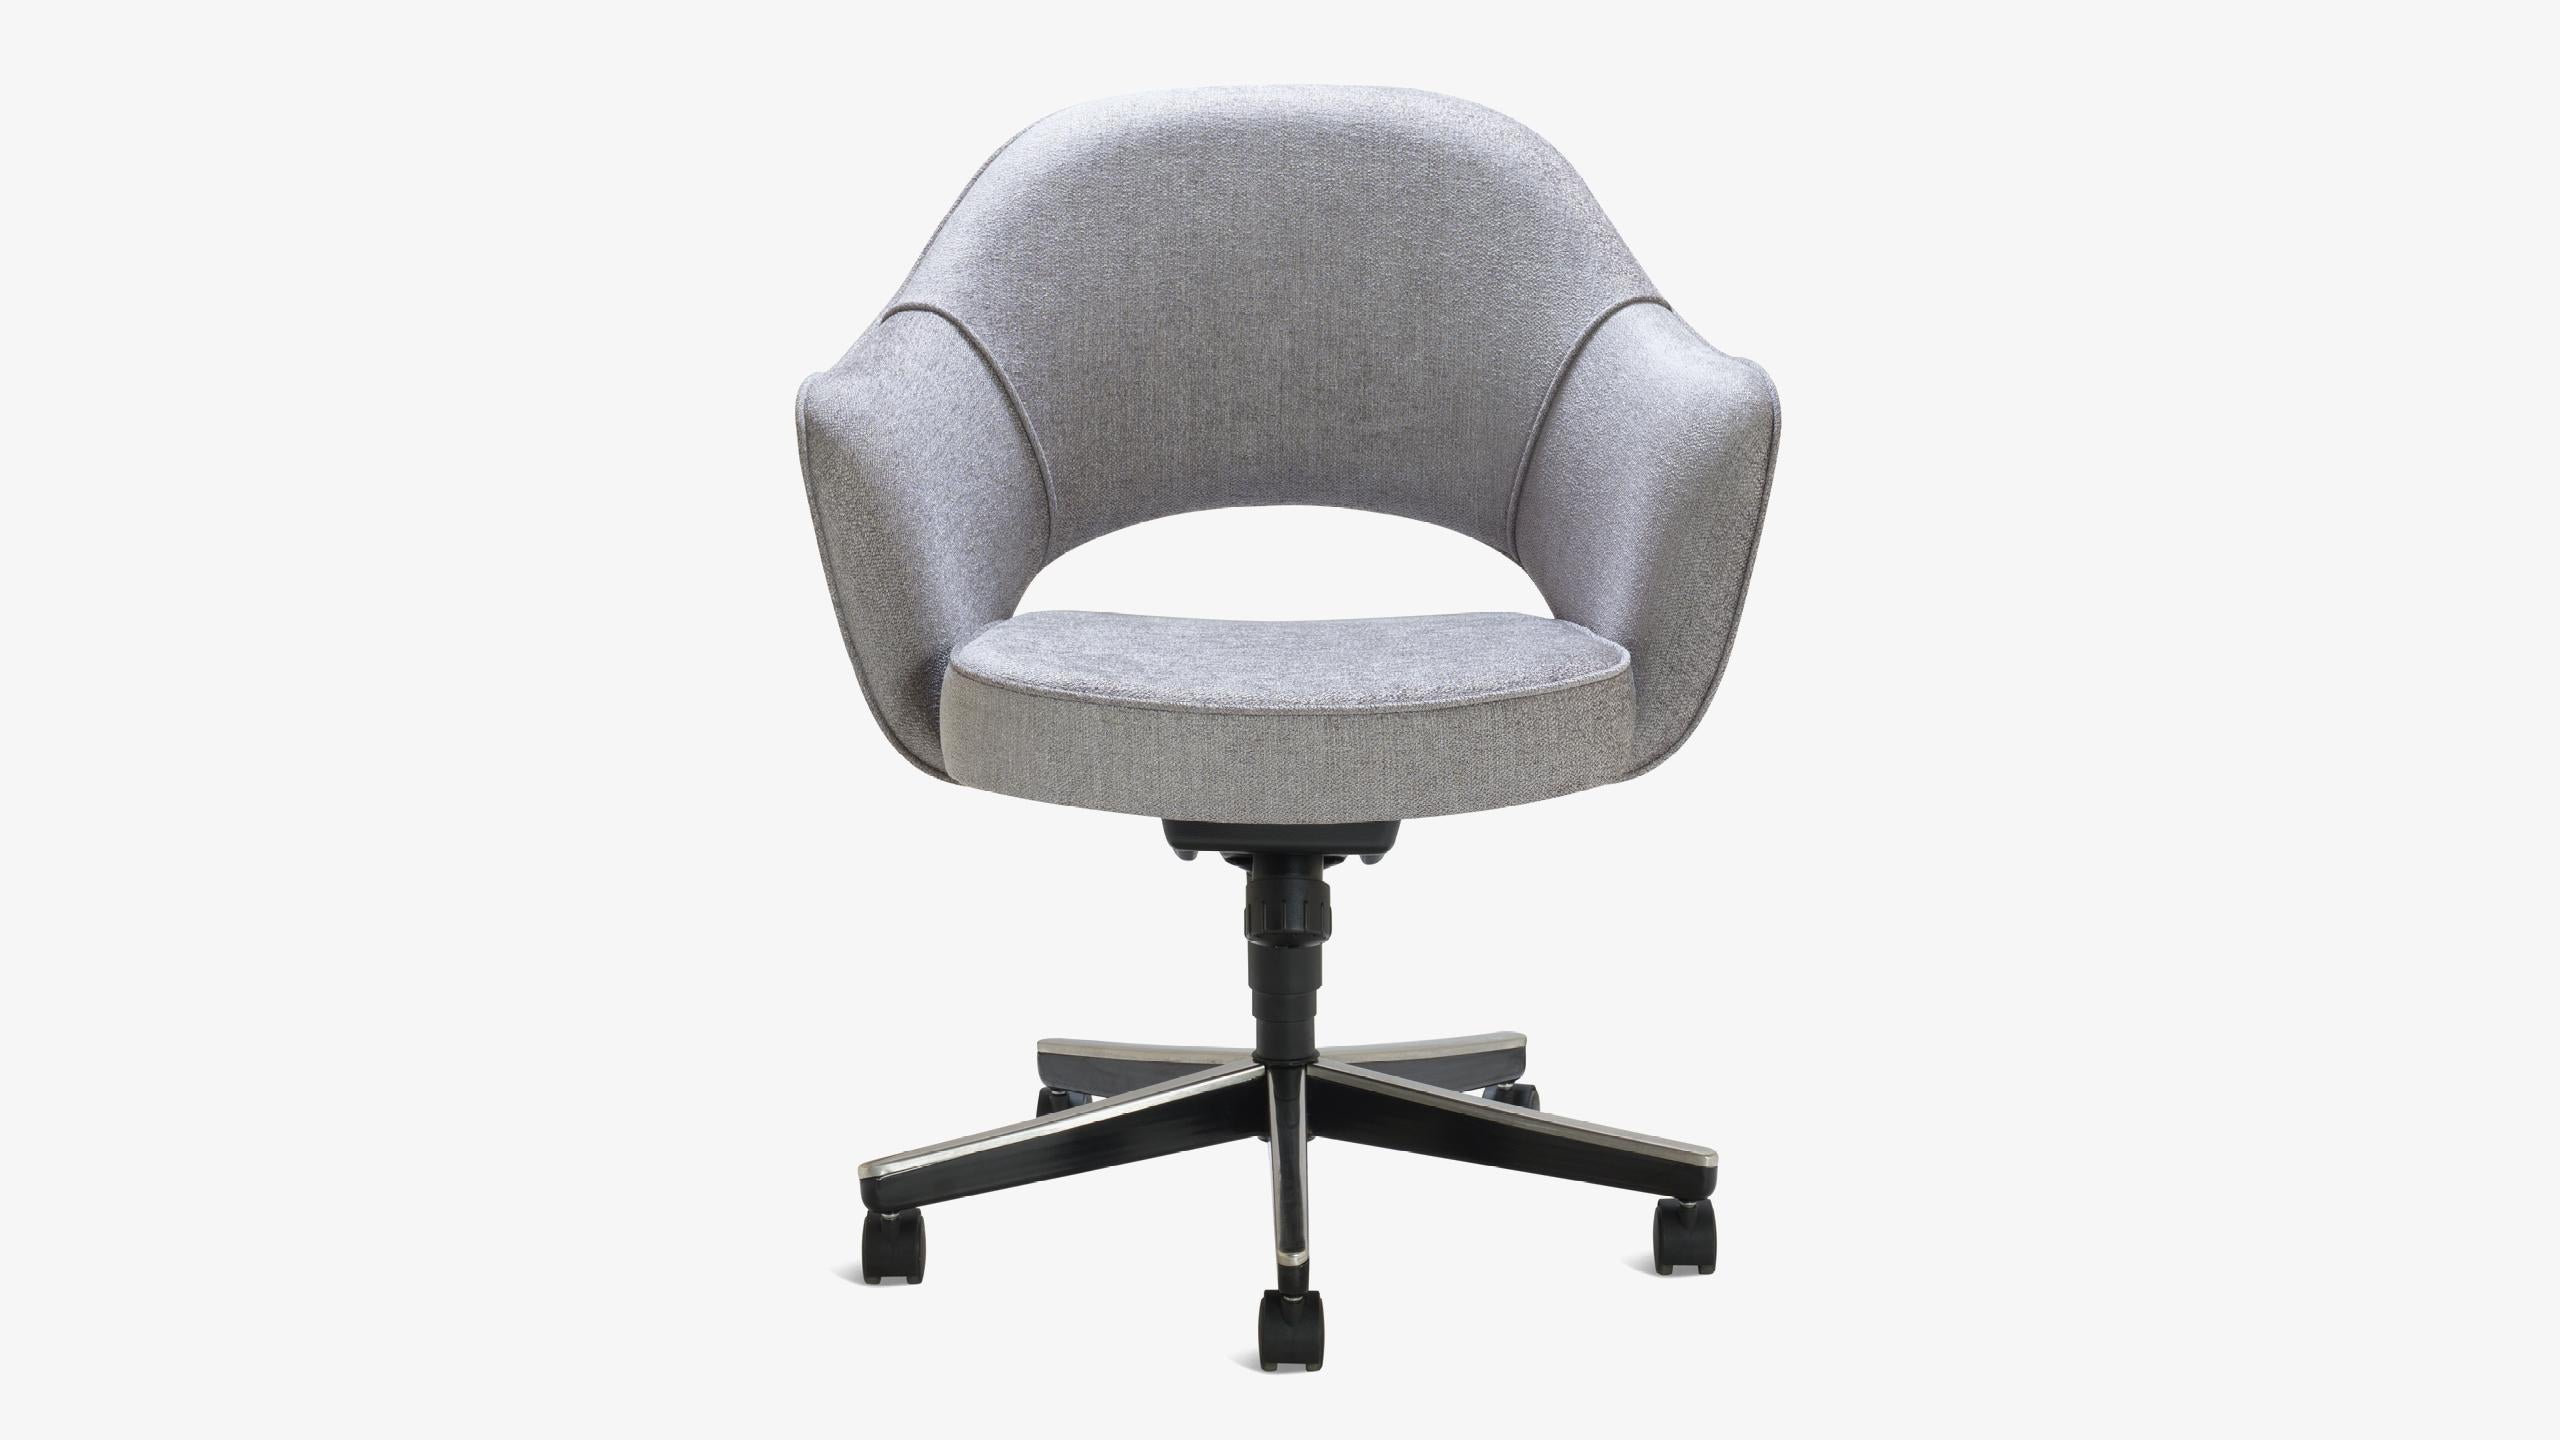 We have been restoring Saarinen executive chairs for years in every fabric one can imagine, right in our very own workroom. We’ve restored these chairs using a modern basket weave in sterling gray. Skilled craftsmen bring each chair back to life to